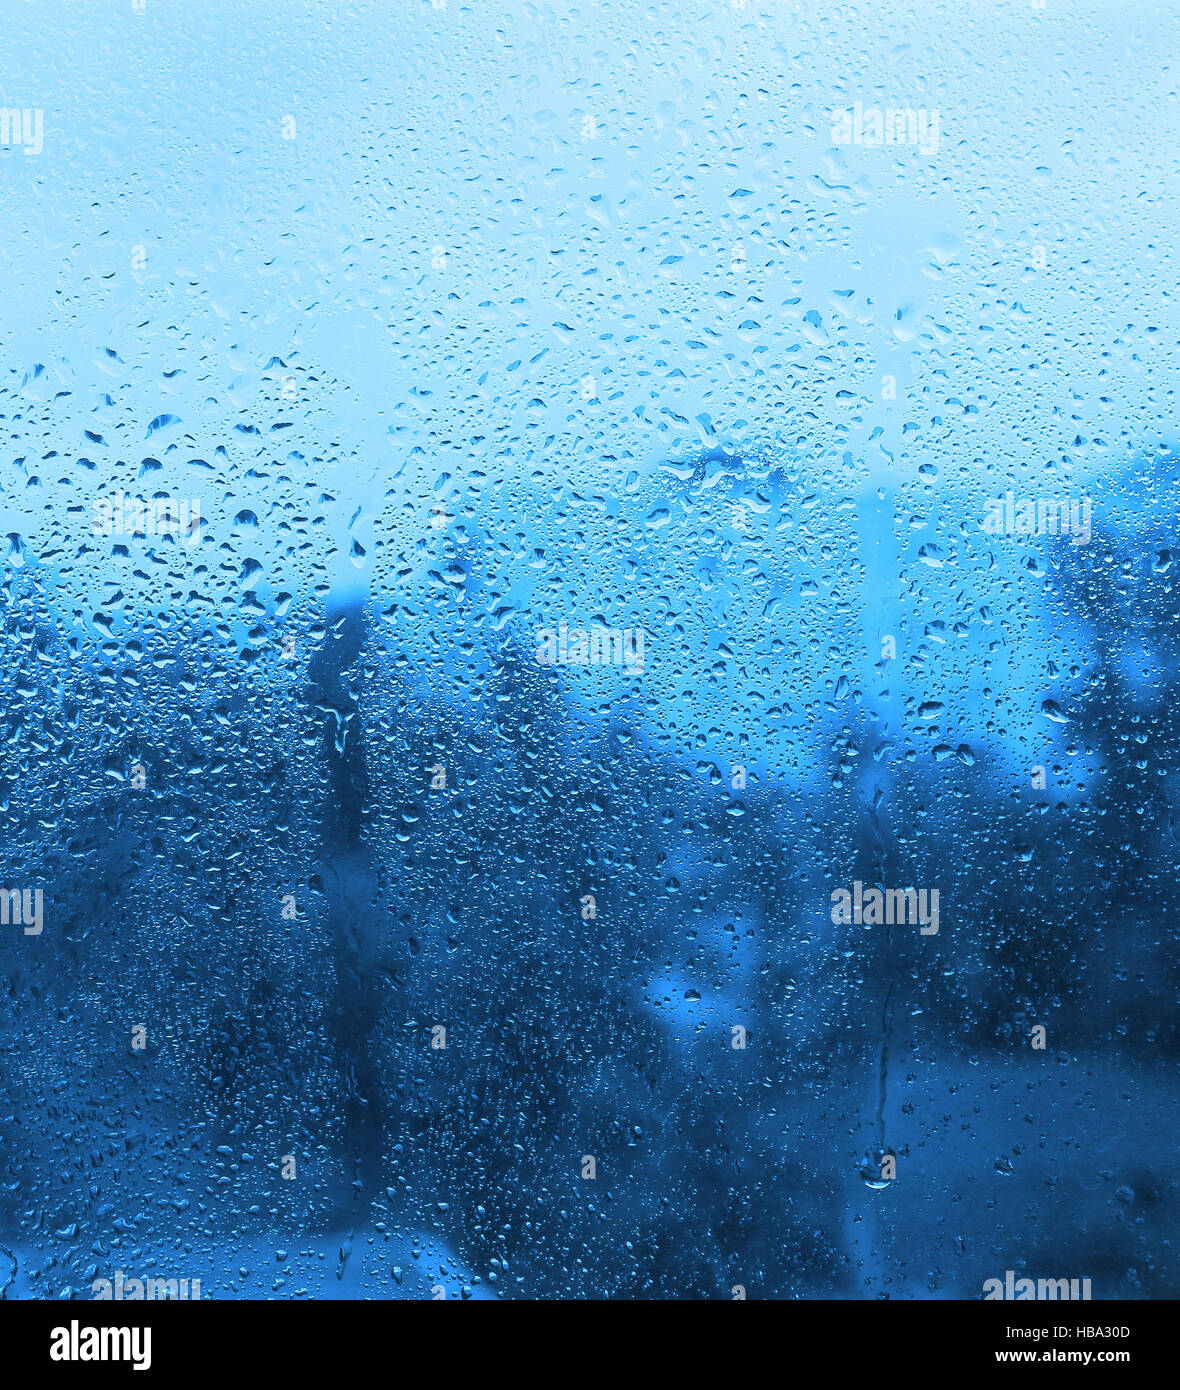 Natural drops of water on window glass Stock Photo